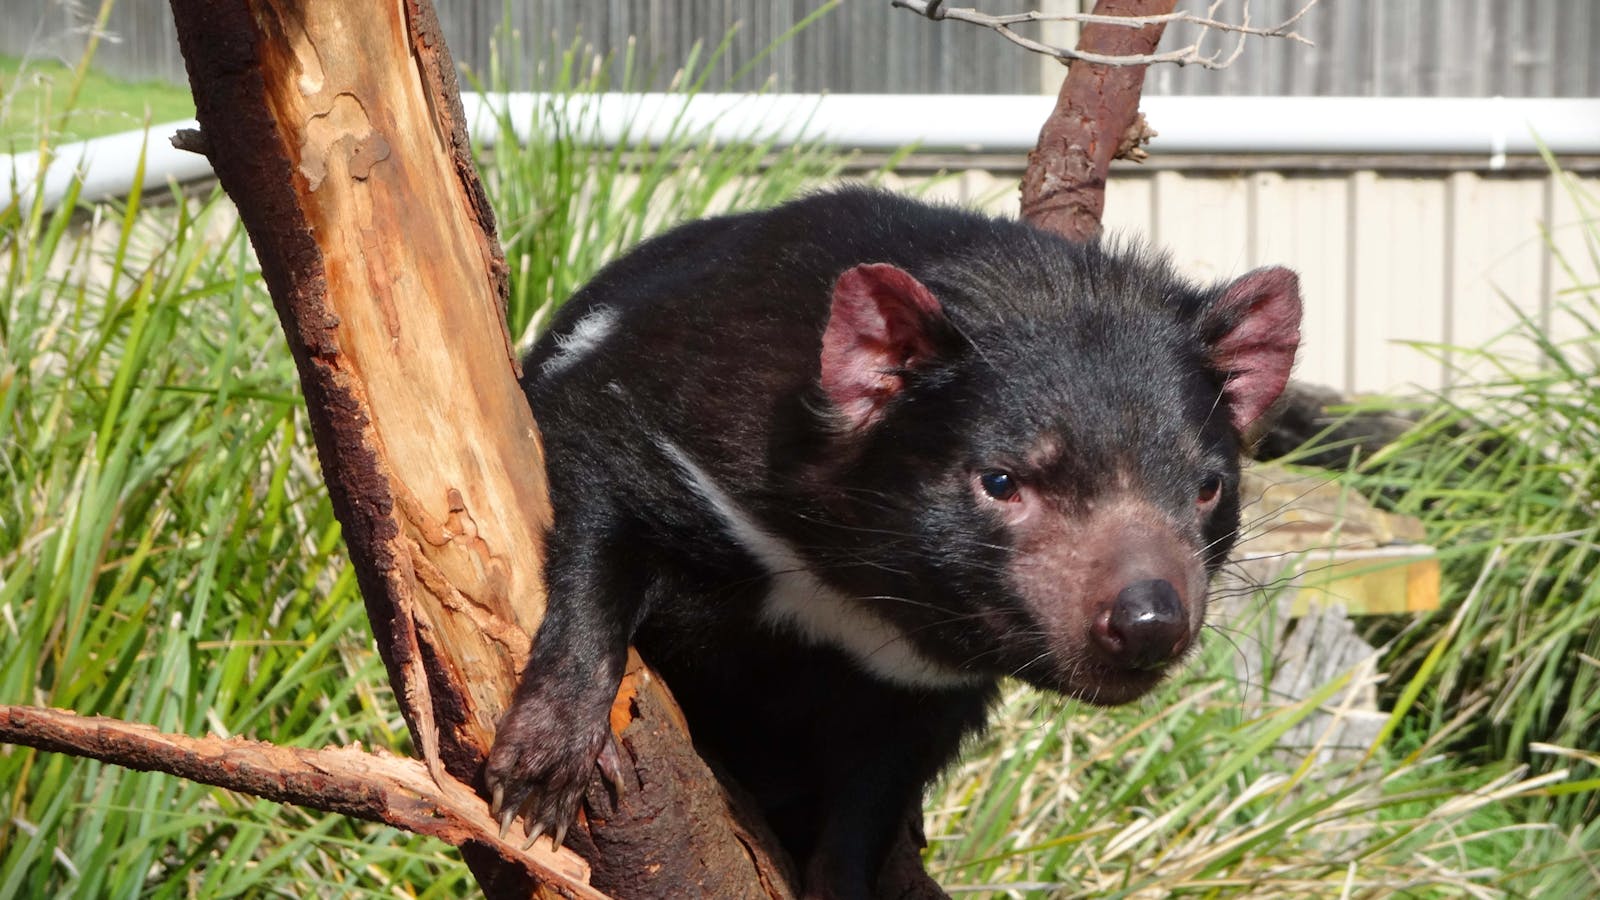 Up close & personal with the Tasmanian Devil.